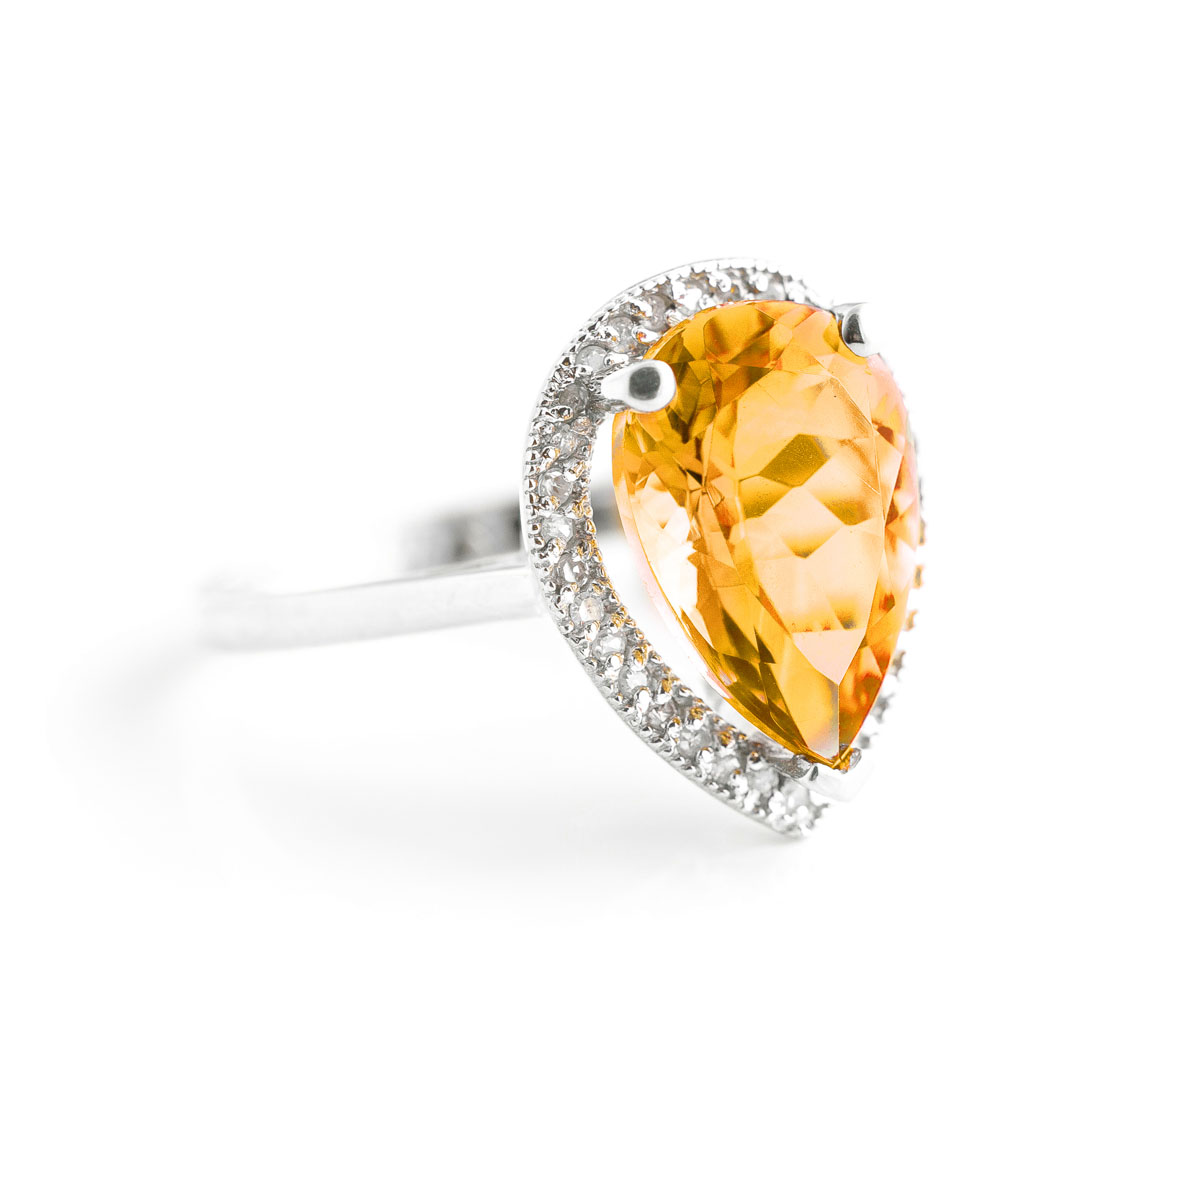 Citrine Halo Ring 3.41 ctw in 9ct White Gold